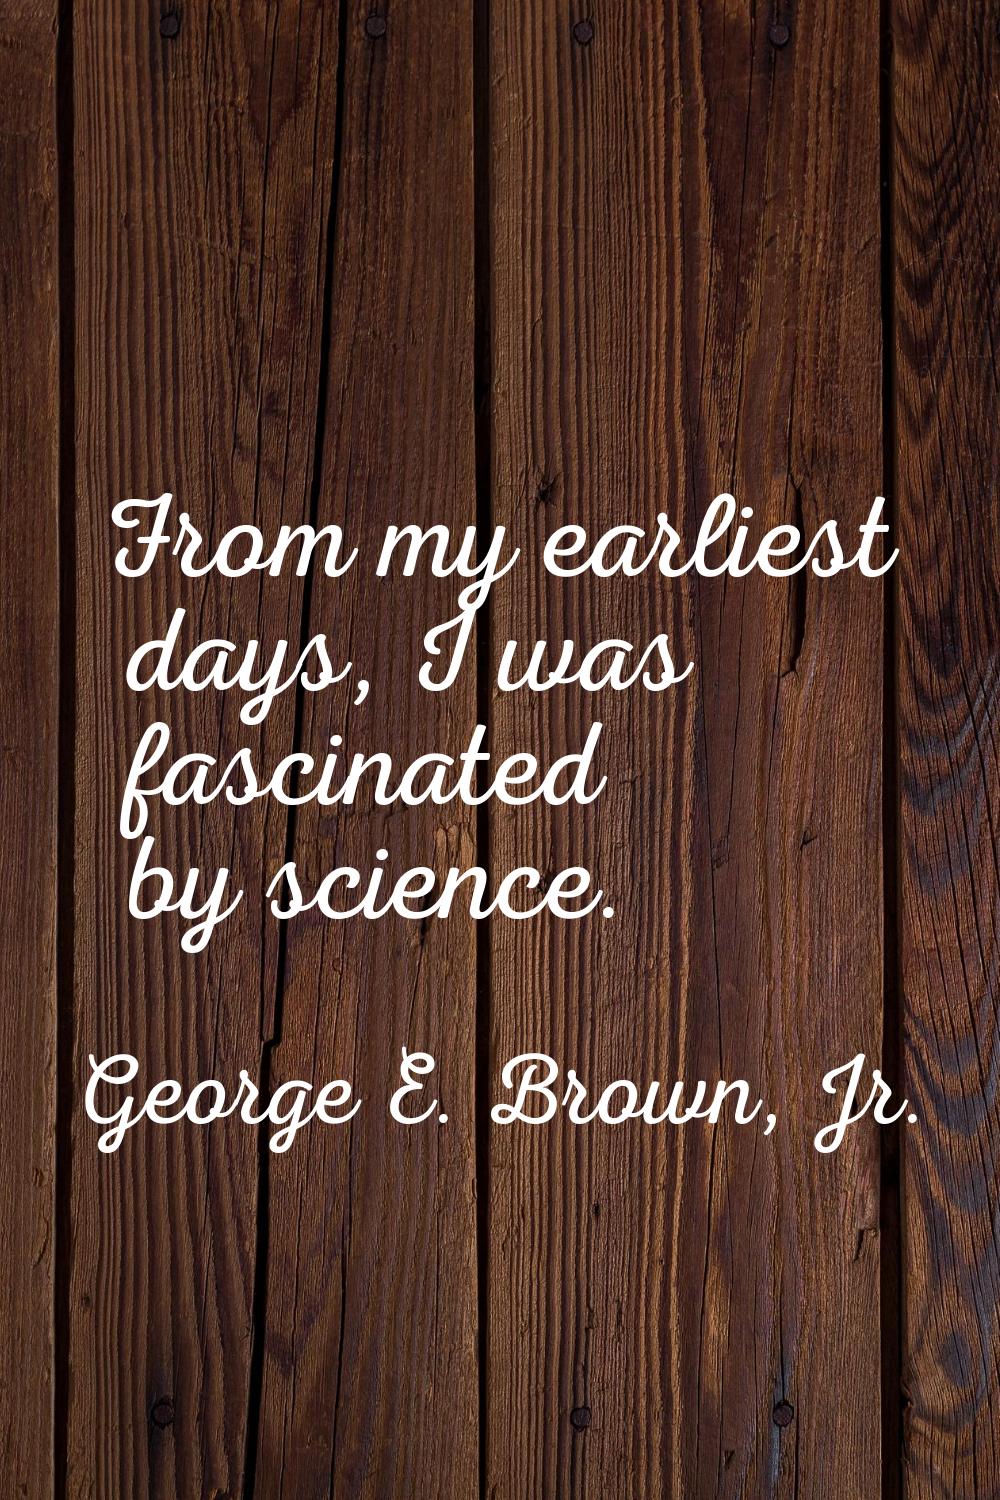 From my earliest days, I was fascinated by science.